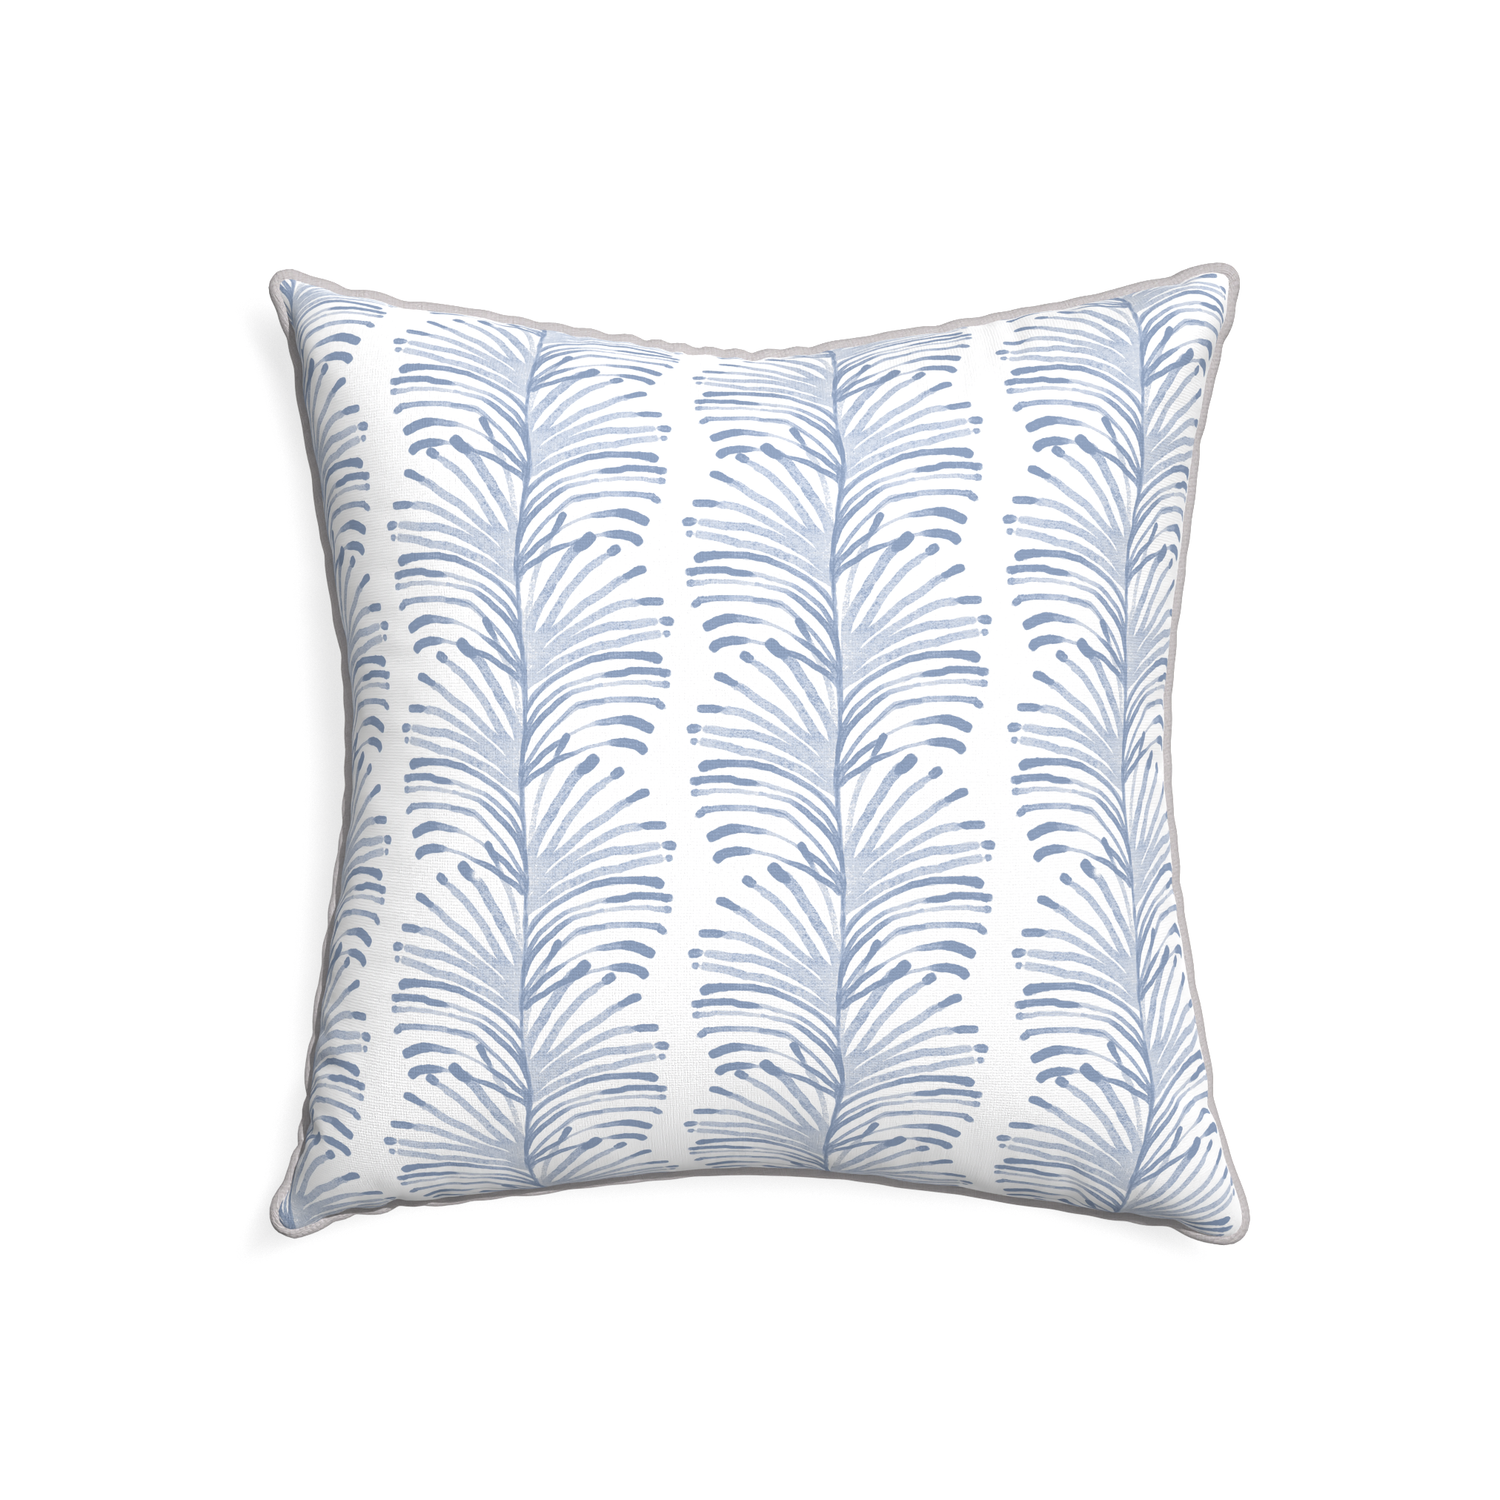 22-square emma sky custom sky blue botanical stripepillow with pebble piping on white background